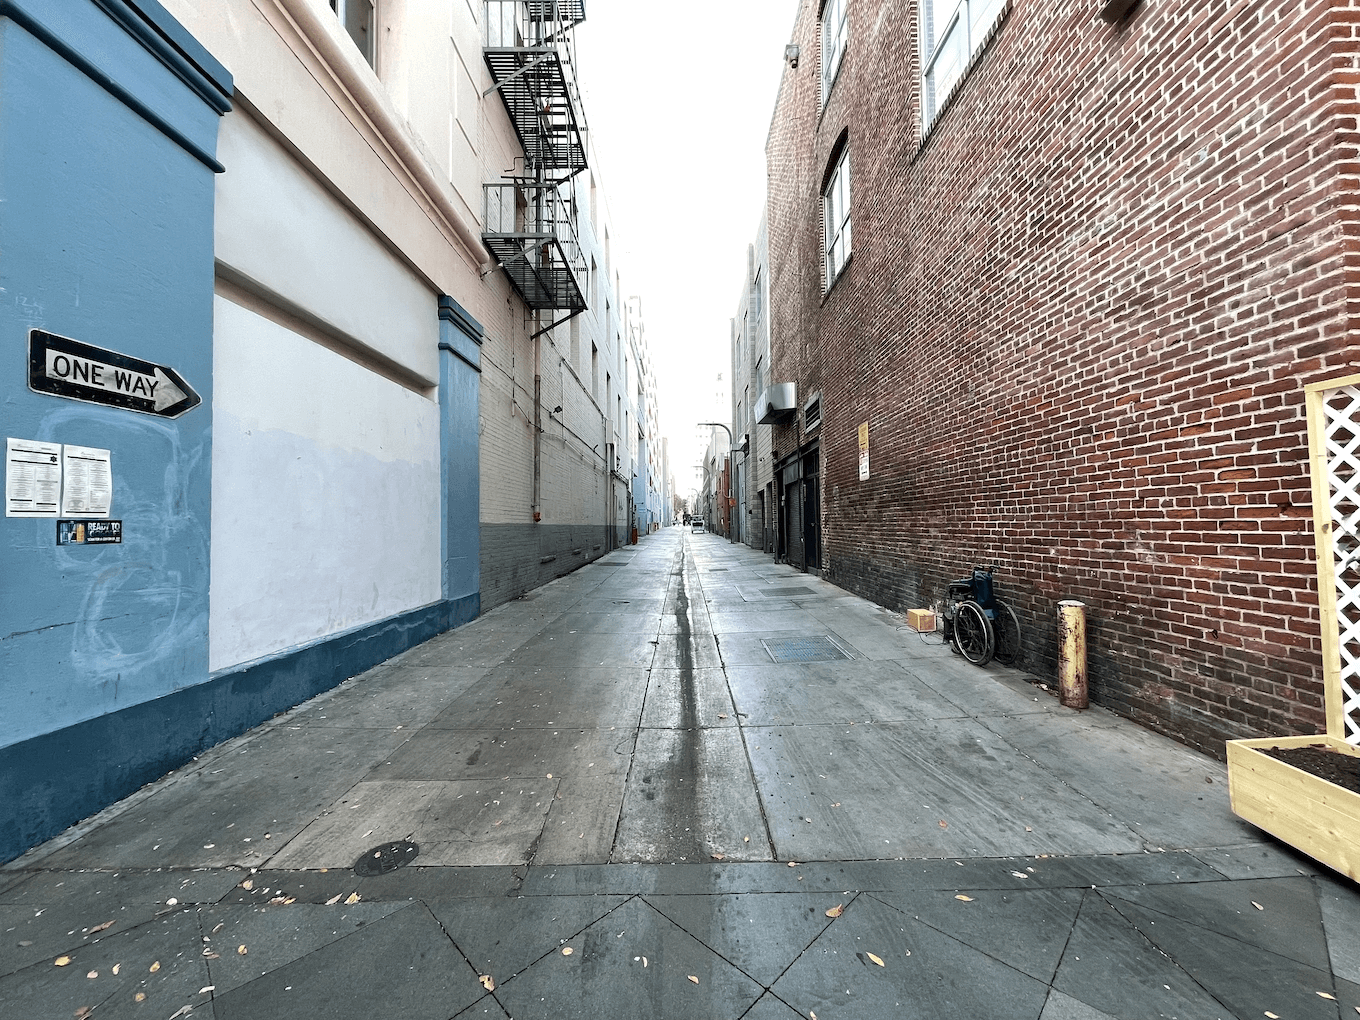 Ultra Wide shot of leading lines down an alleyway.